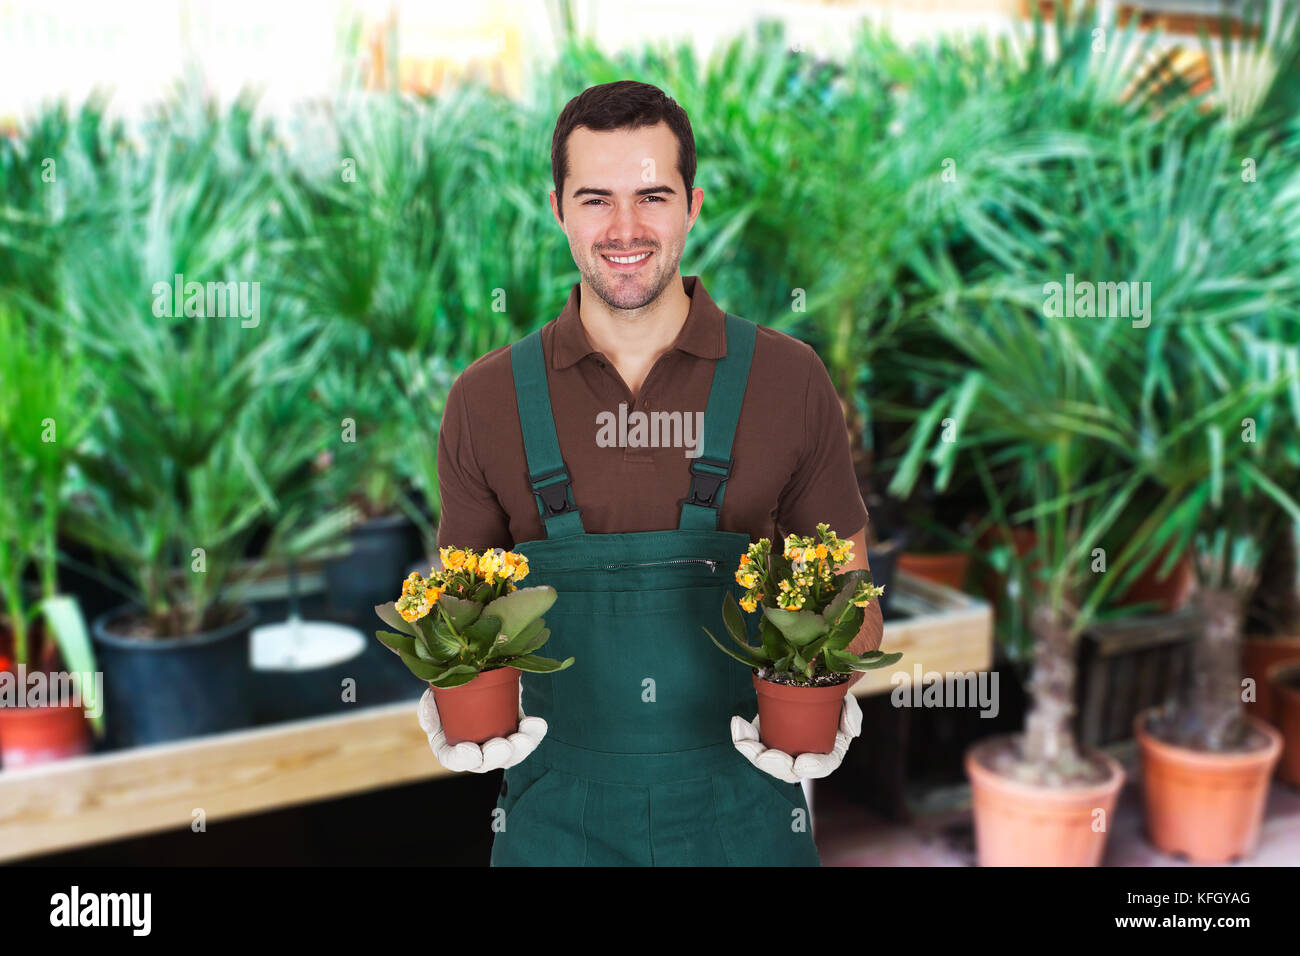 Portrait Of Young Male Gardener Carrying Two Flowerpots Stock Photo